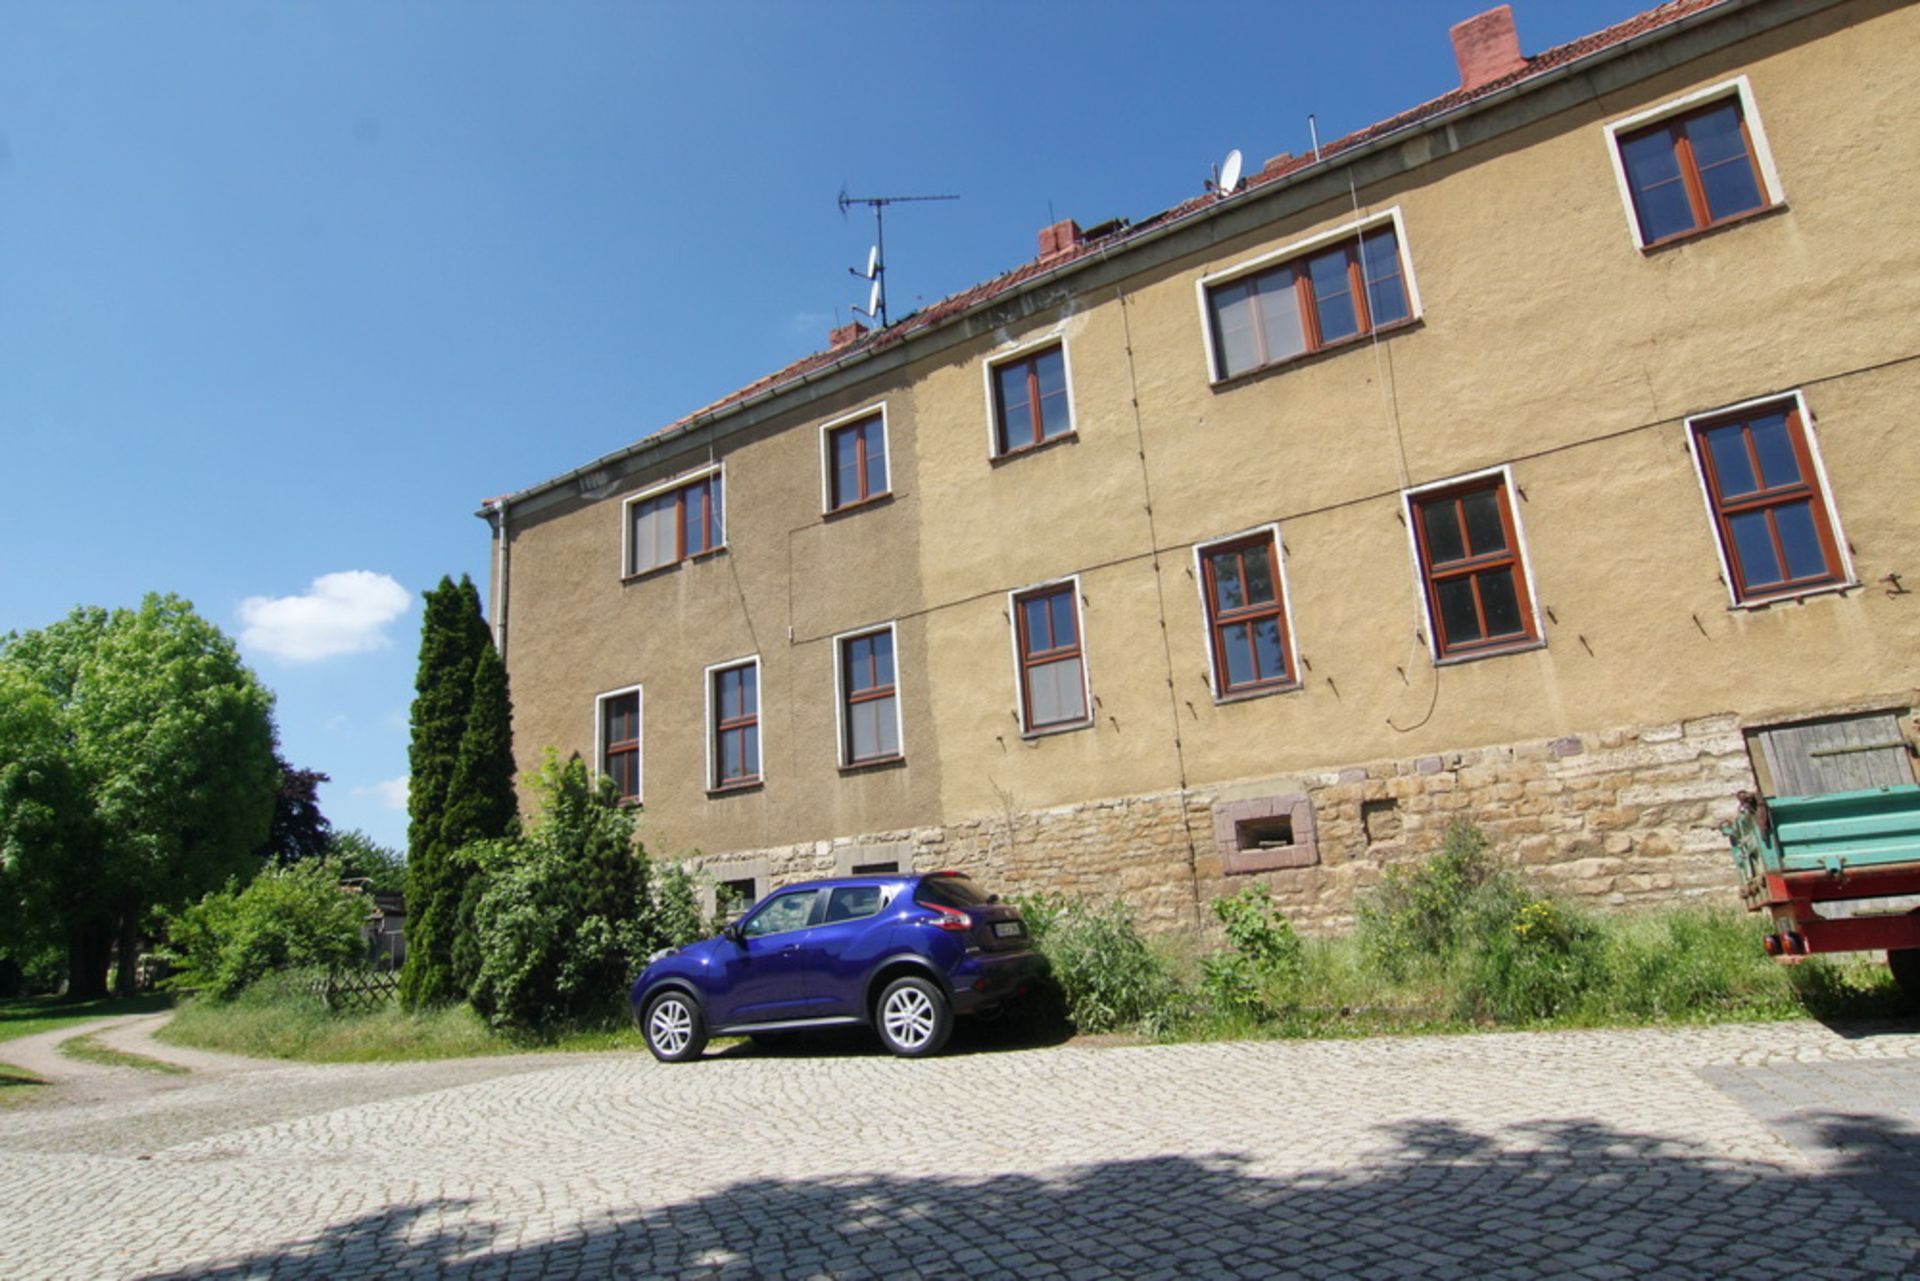 LARGE HOUSING BLOCK HORNSOMMEM, GERMANY READY TO MOVE INTO FREEHOLD VACANT POSSESSION - Image 75 of 91